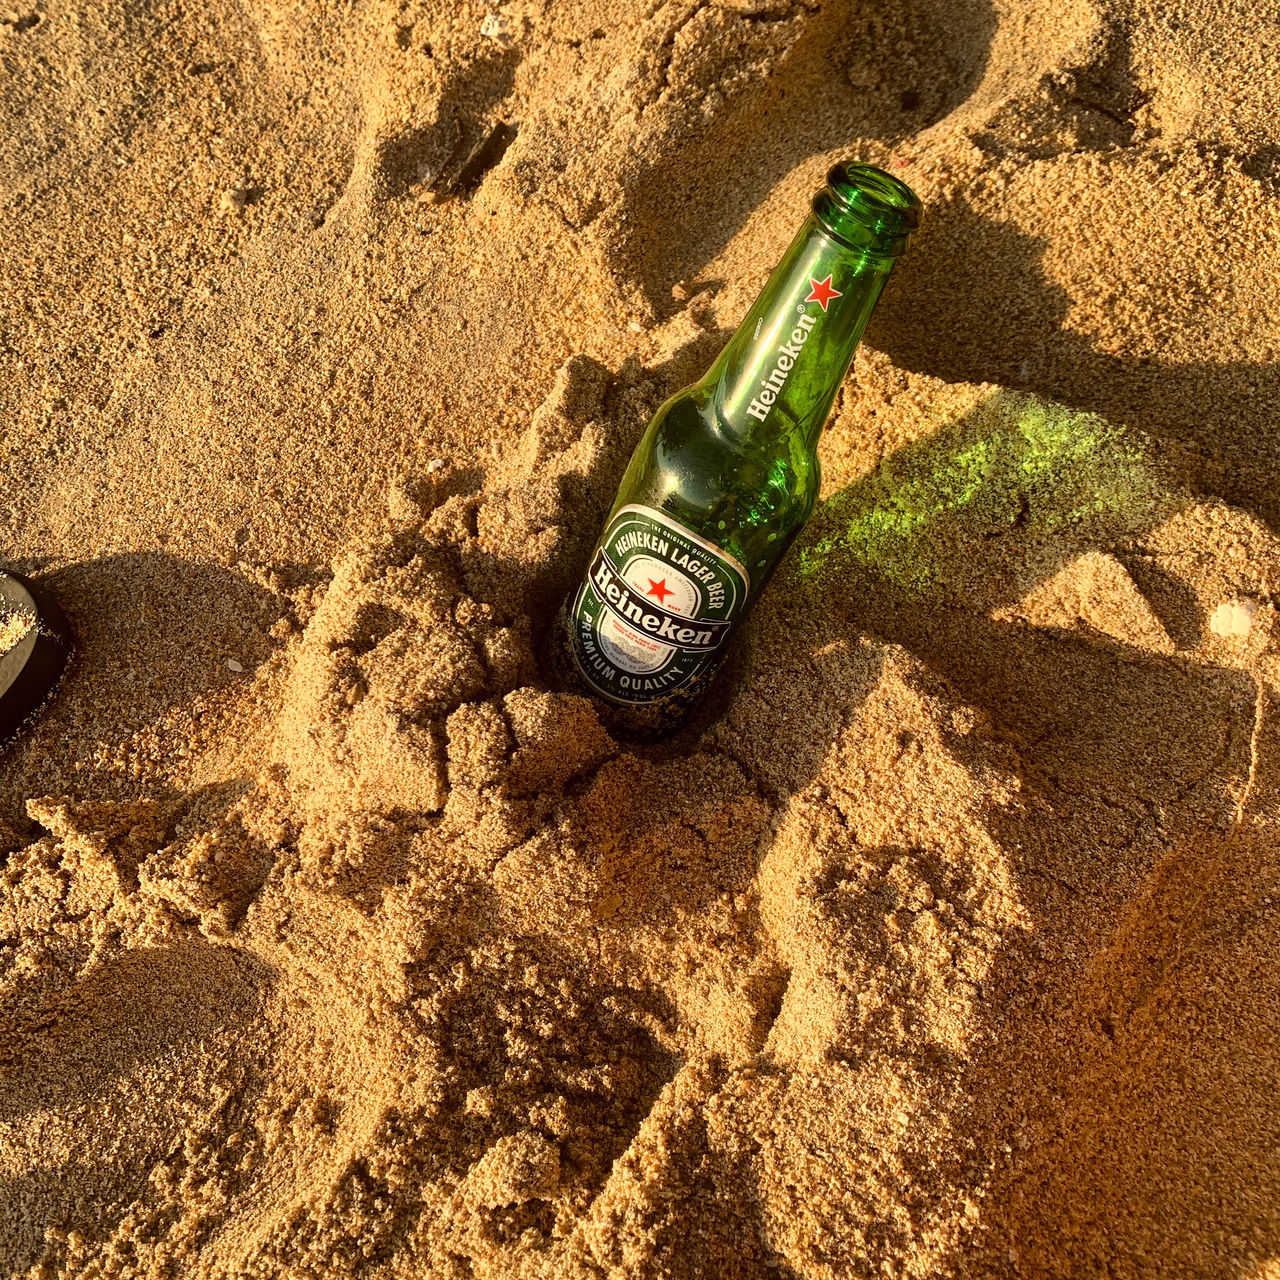 soil, bottle, sand, land, beach, sunlight, container, green, nature, high angle view, drink, alcohol, beer, refreshment, day, shadow, no people, outdoors, food and drink, brown